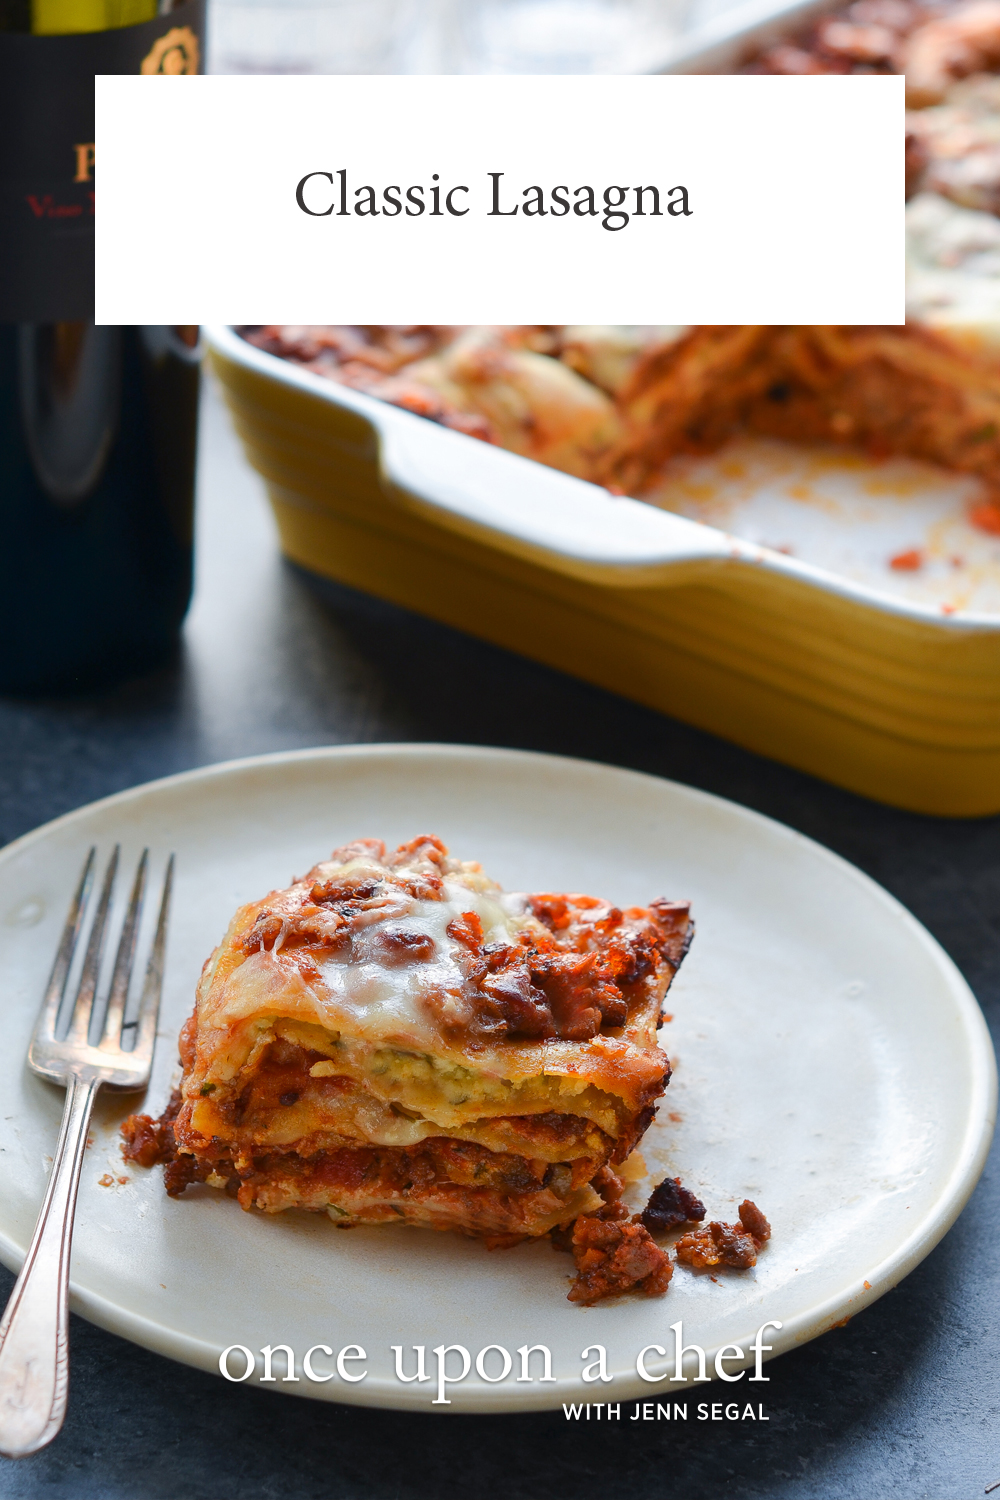 Classic Lasagna - Once Upon a Chef